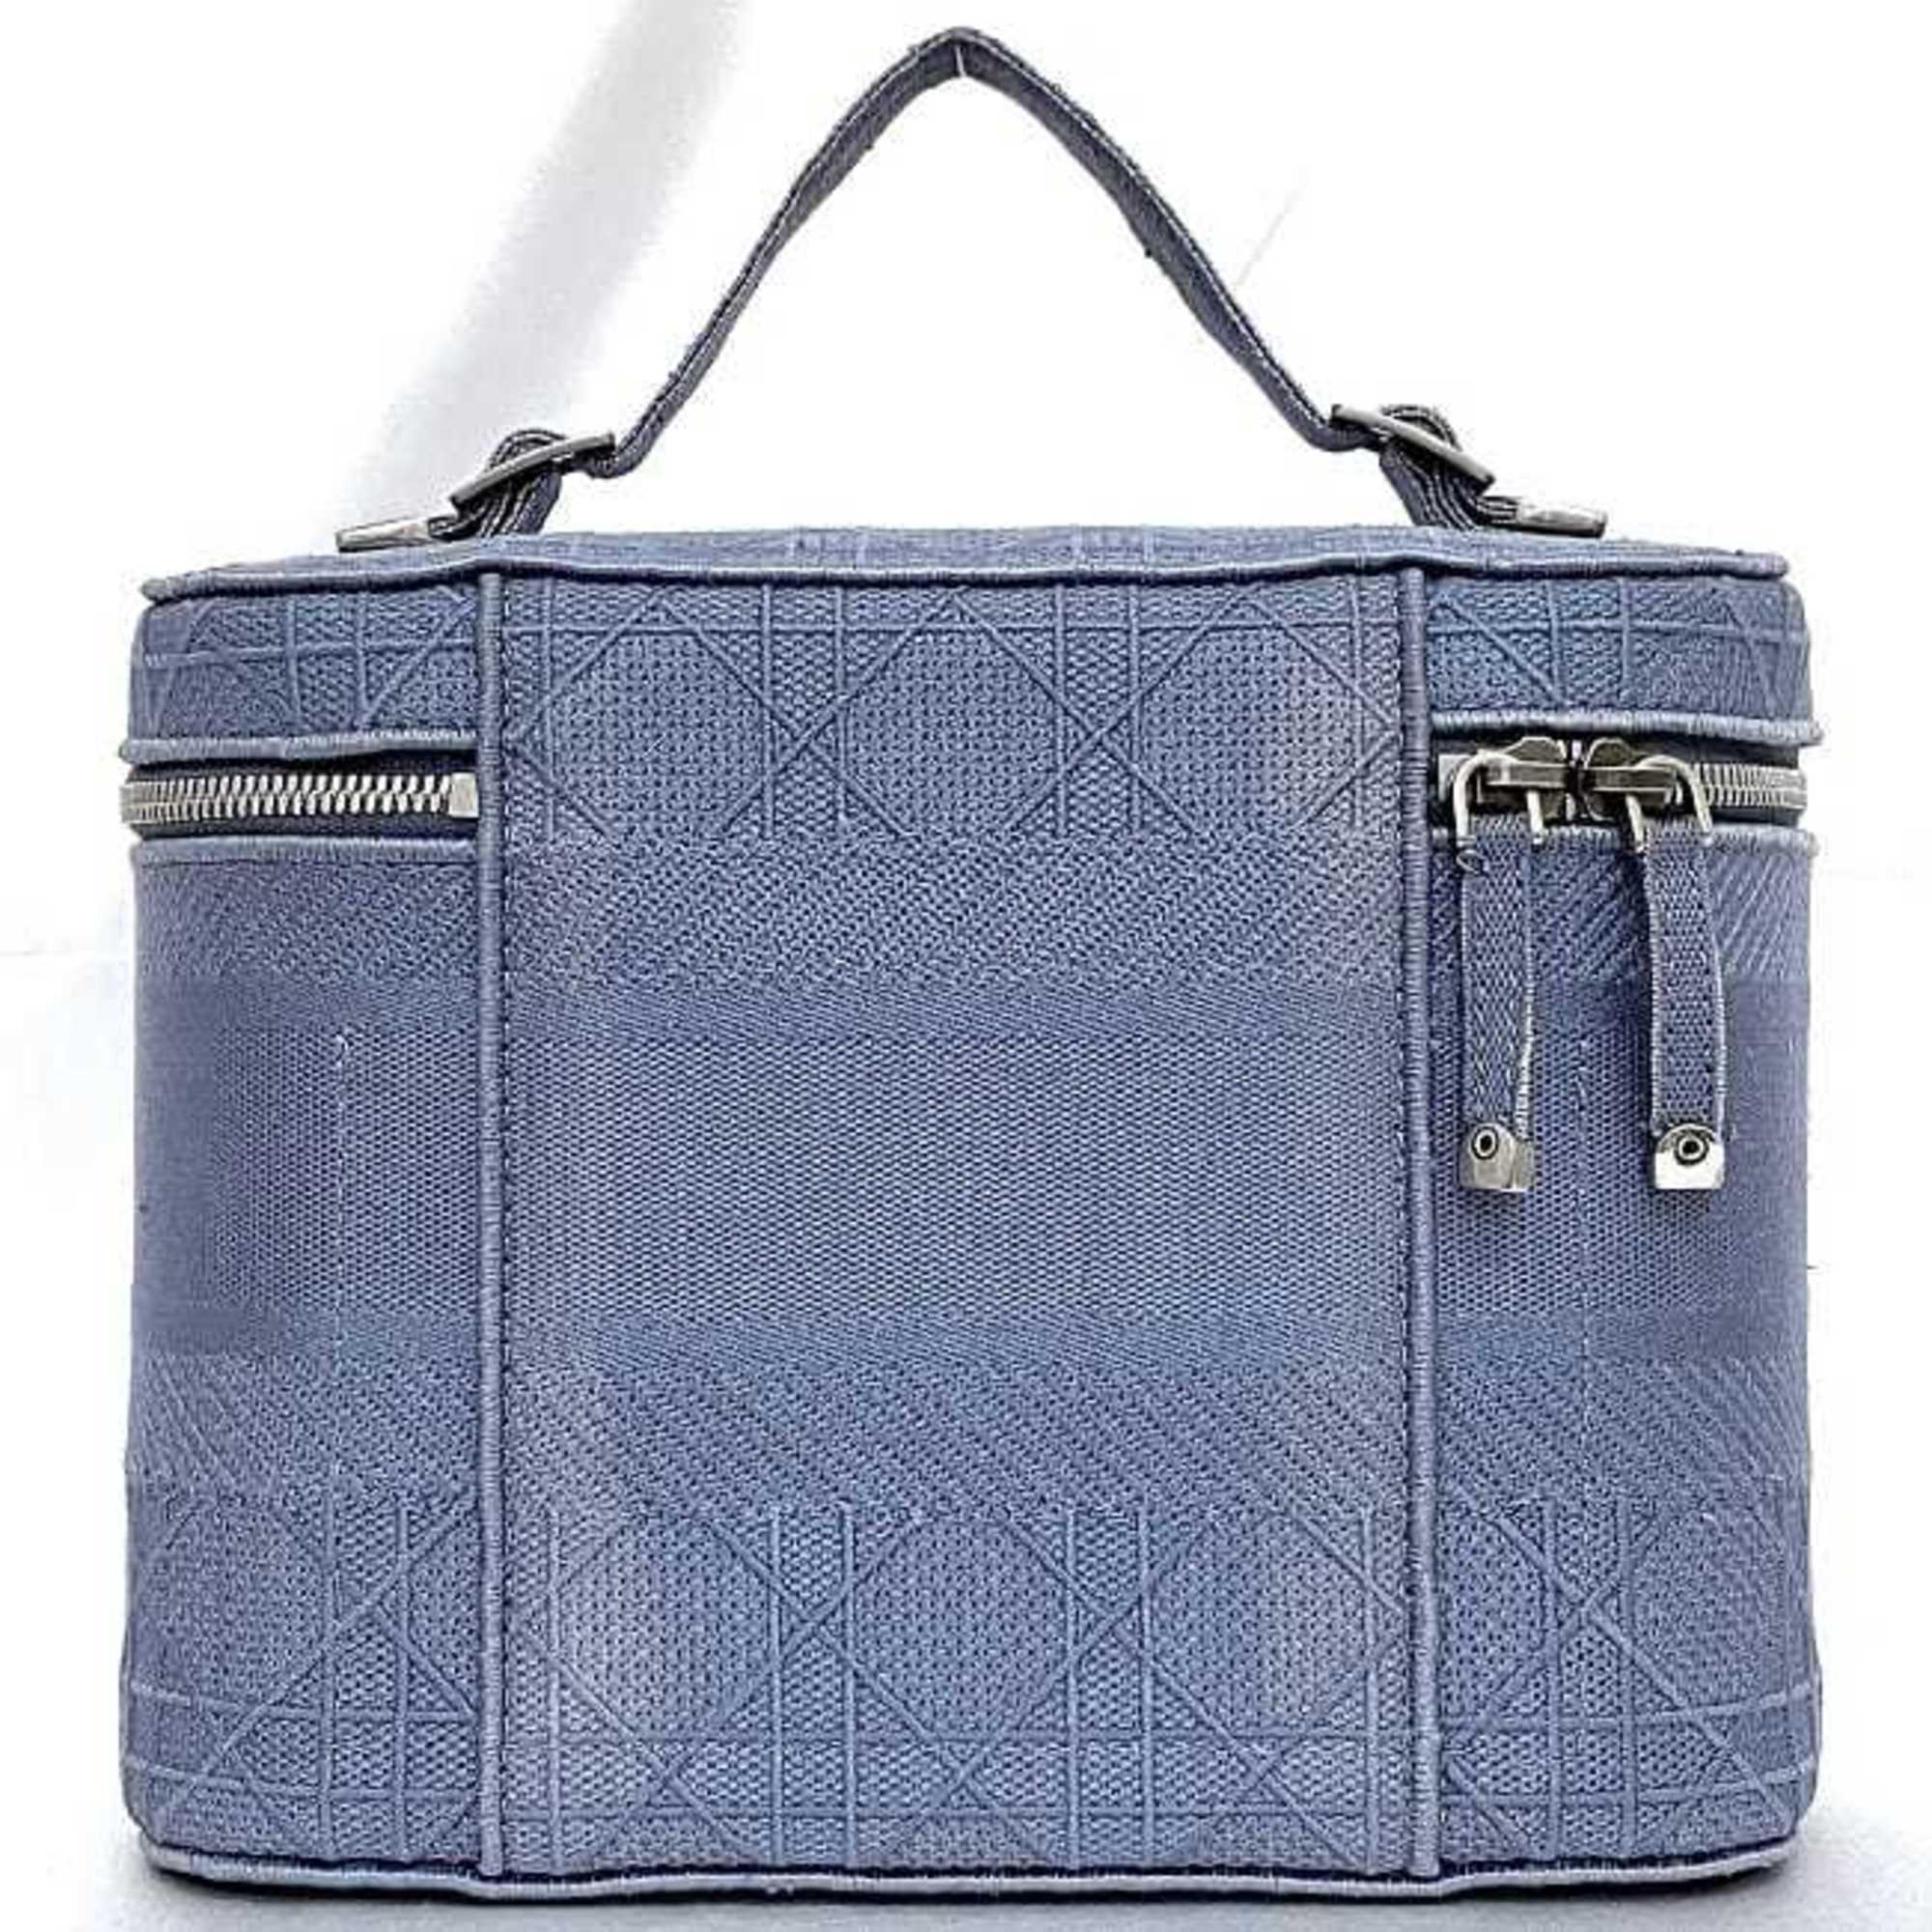 Christian Dior handbag vanity bag light blue cannage f-20528 canvas embroidery self-supporting double